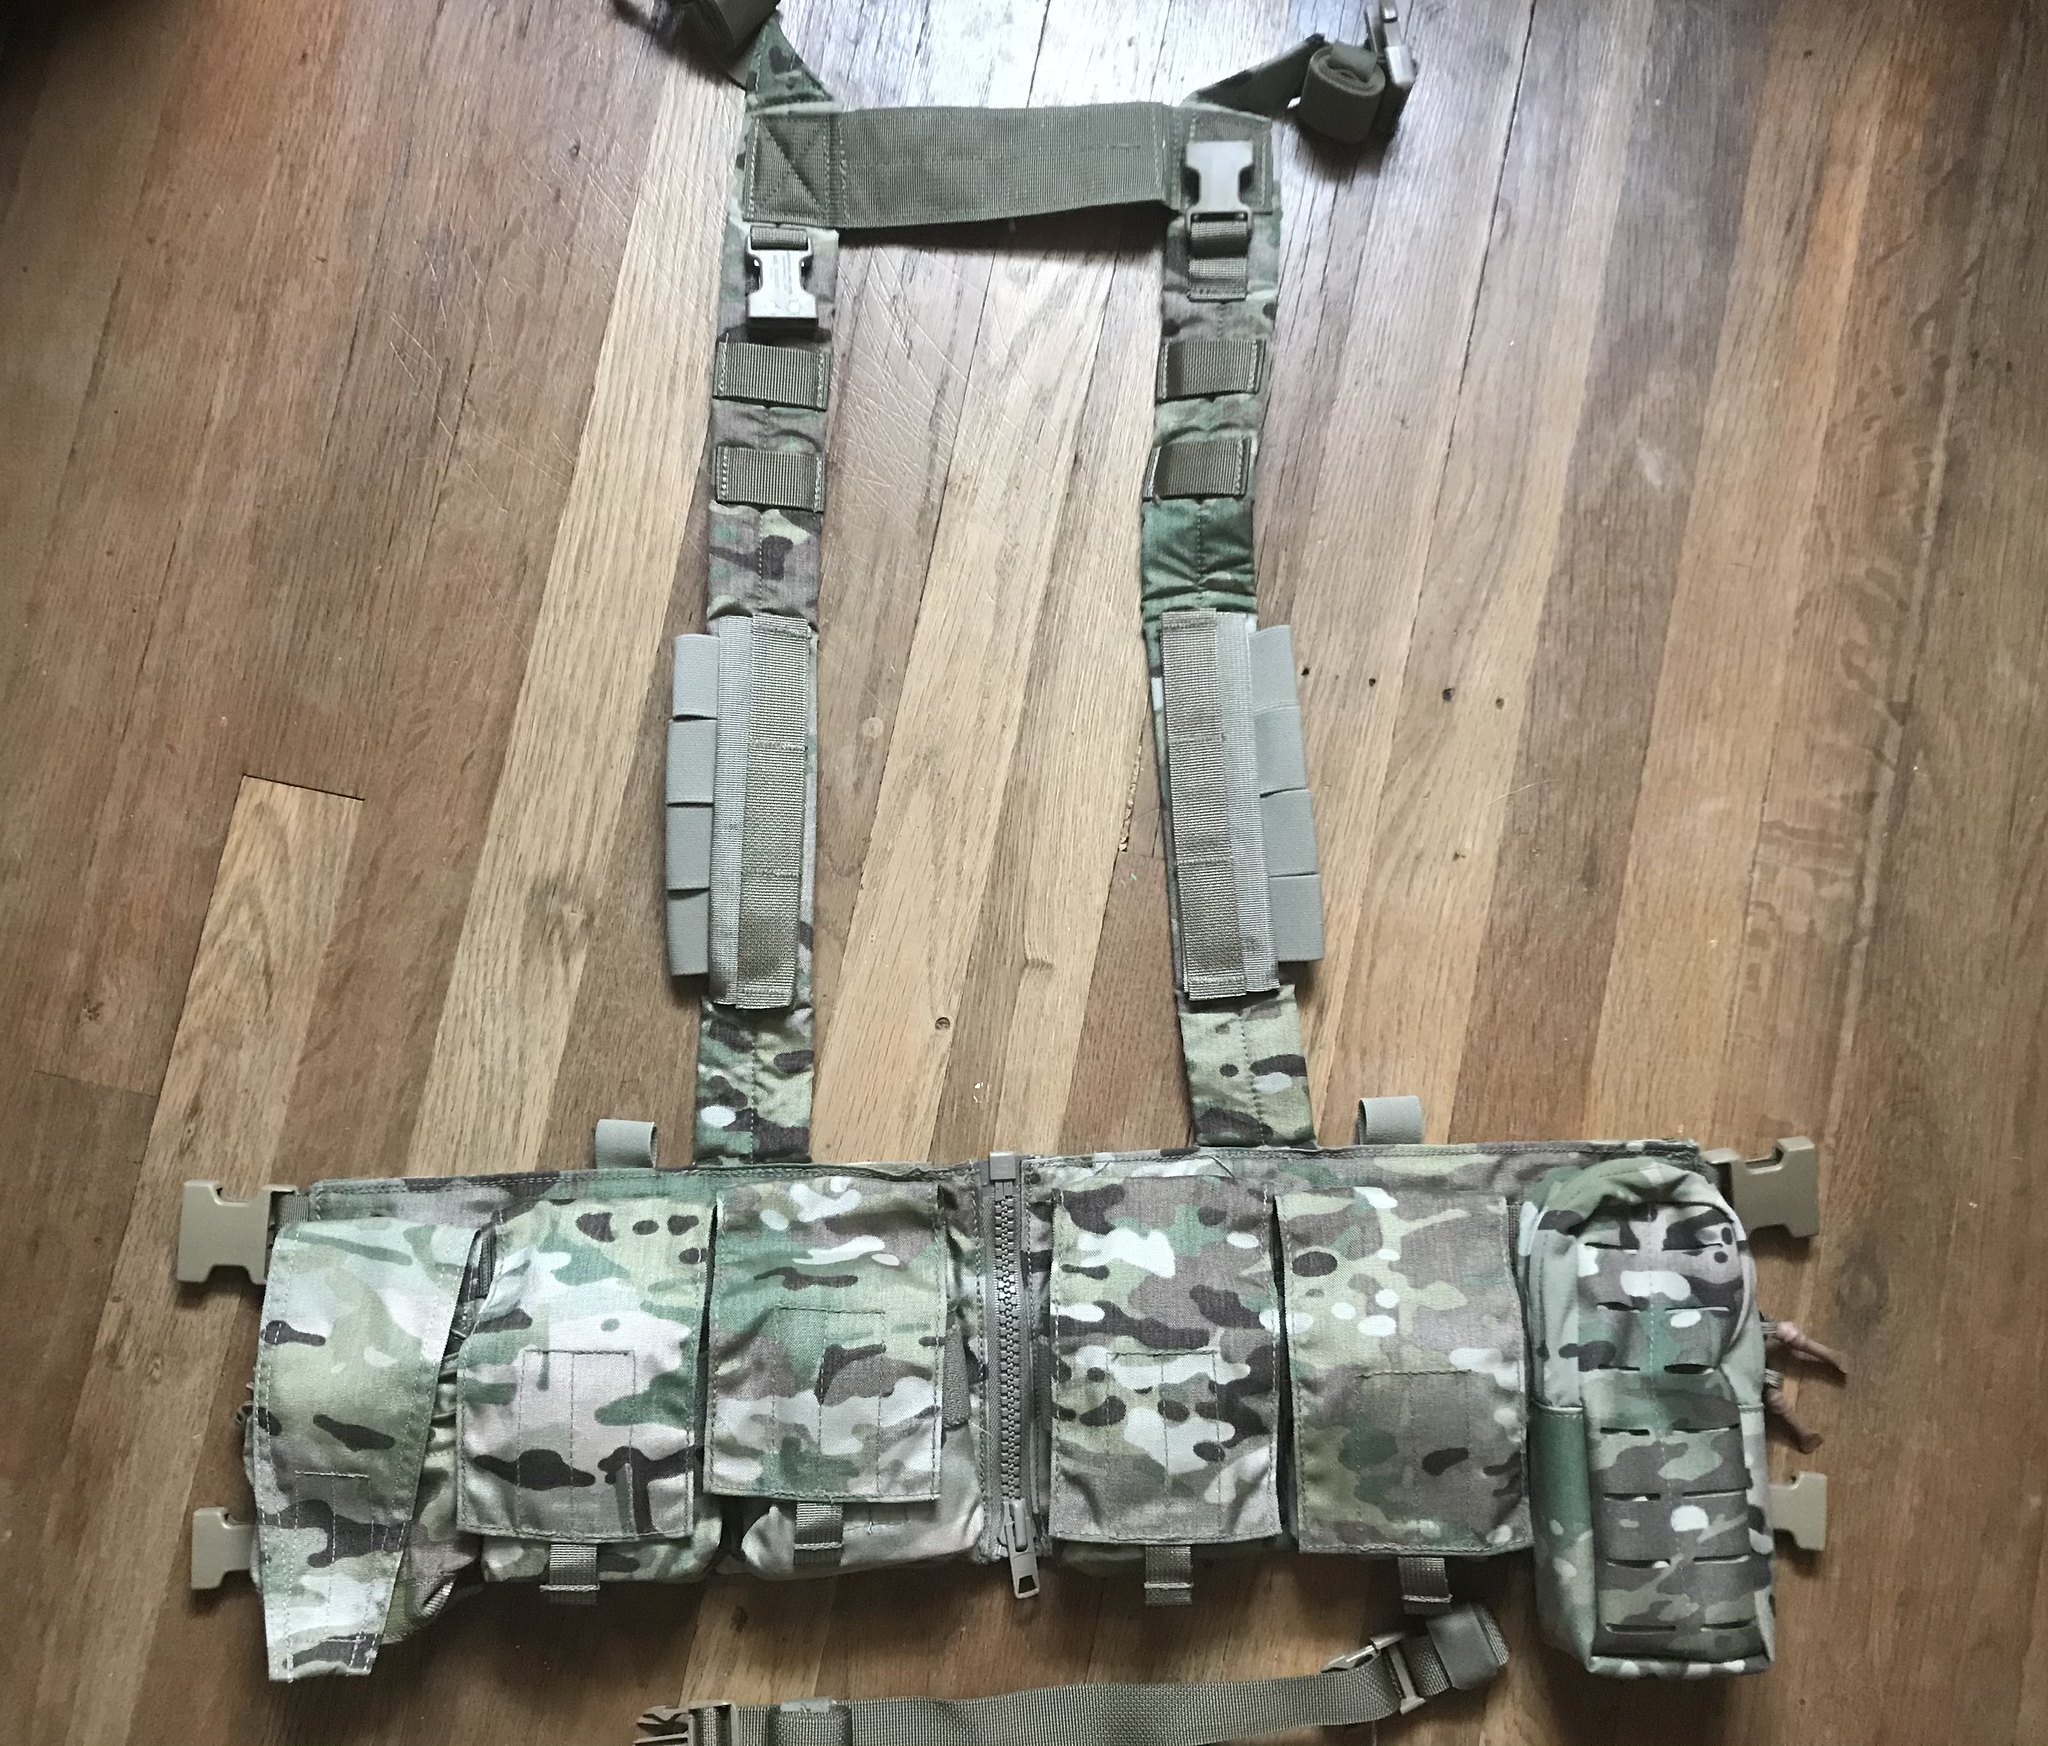 What Recce style Chest rig for use with sr25 pattern mags - AR15.COM